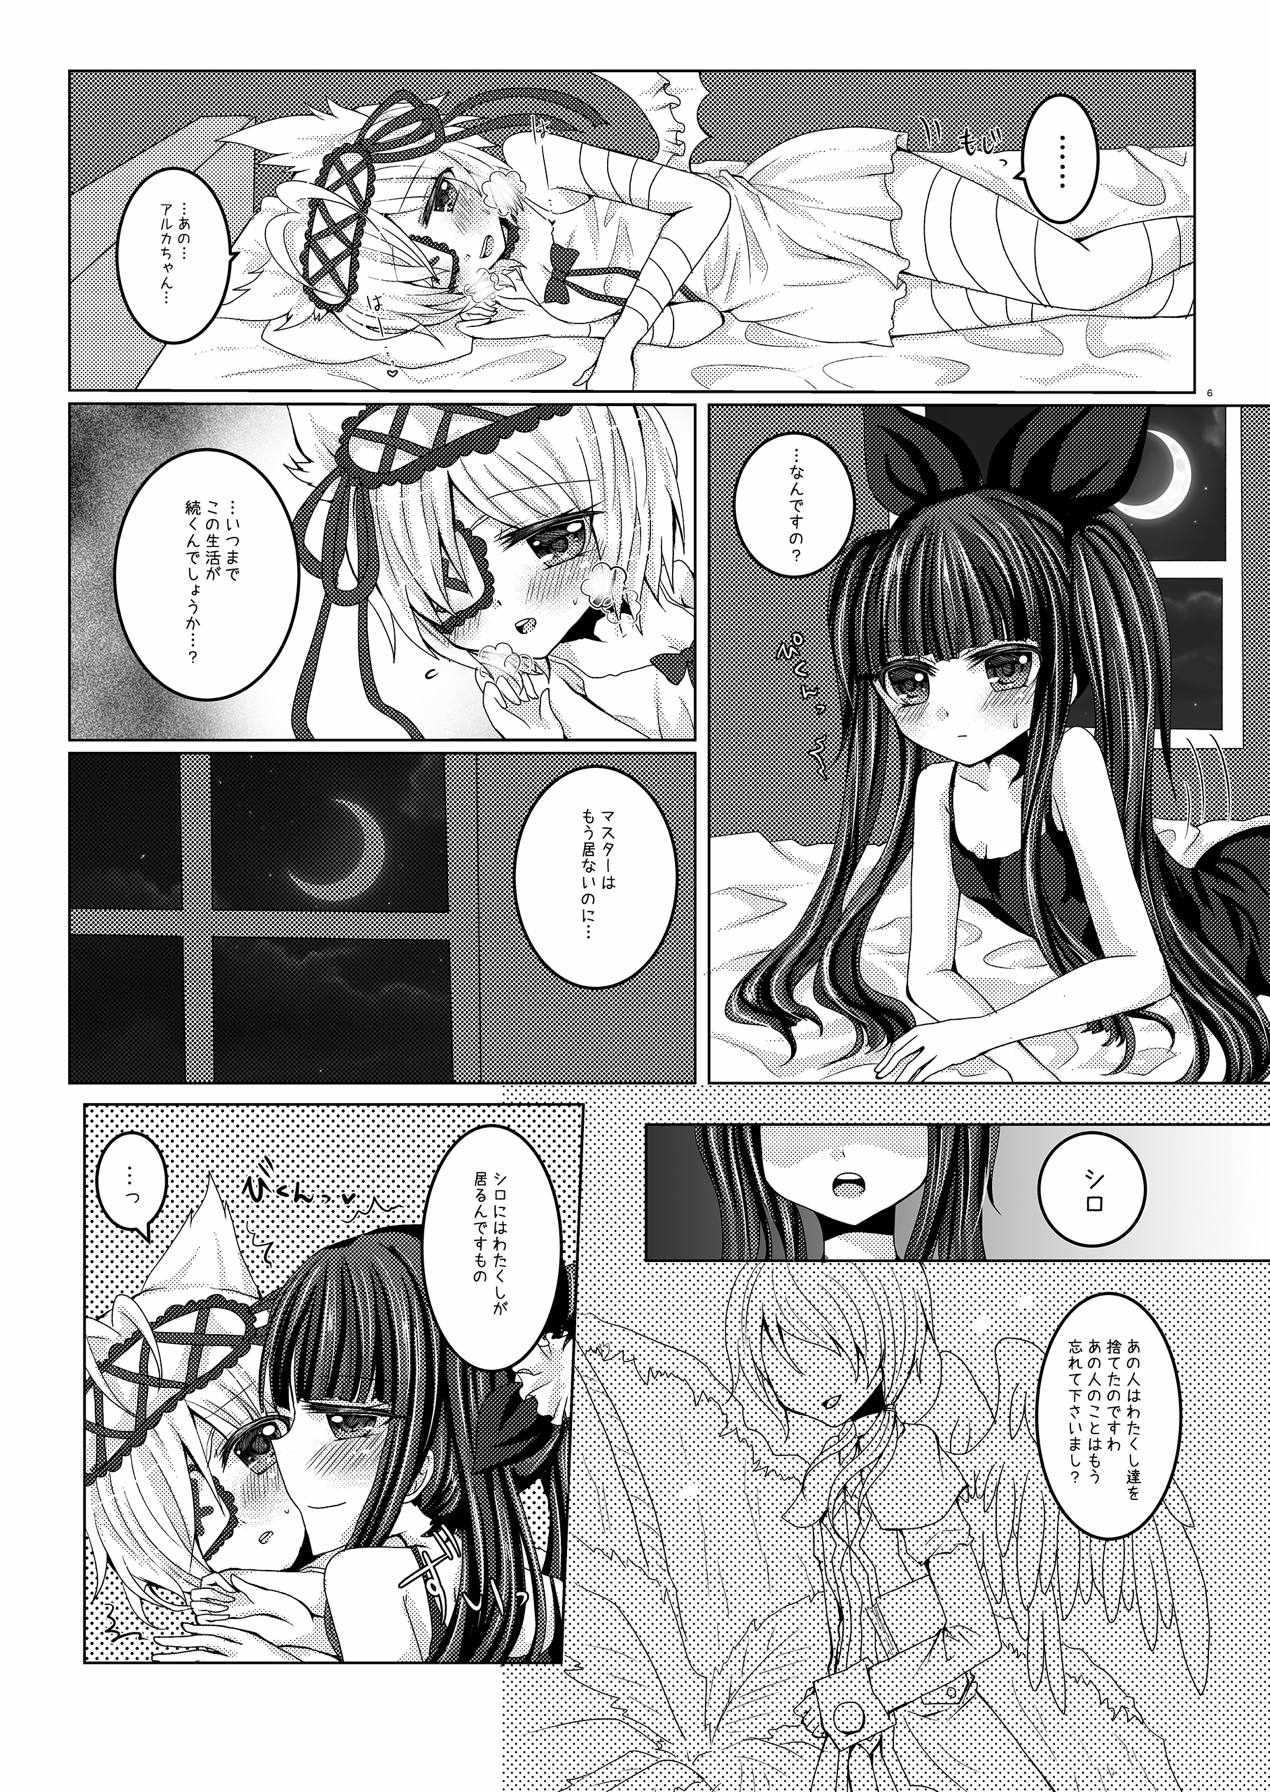 Nice Torikago Shoujo - Emil chronicle online Beauty - Page 5